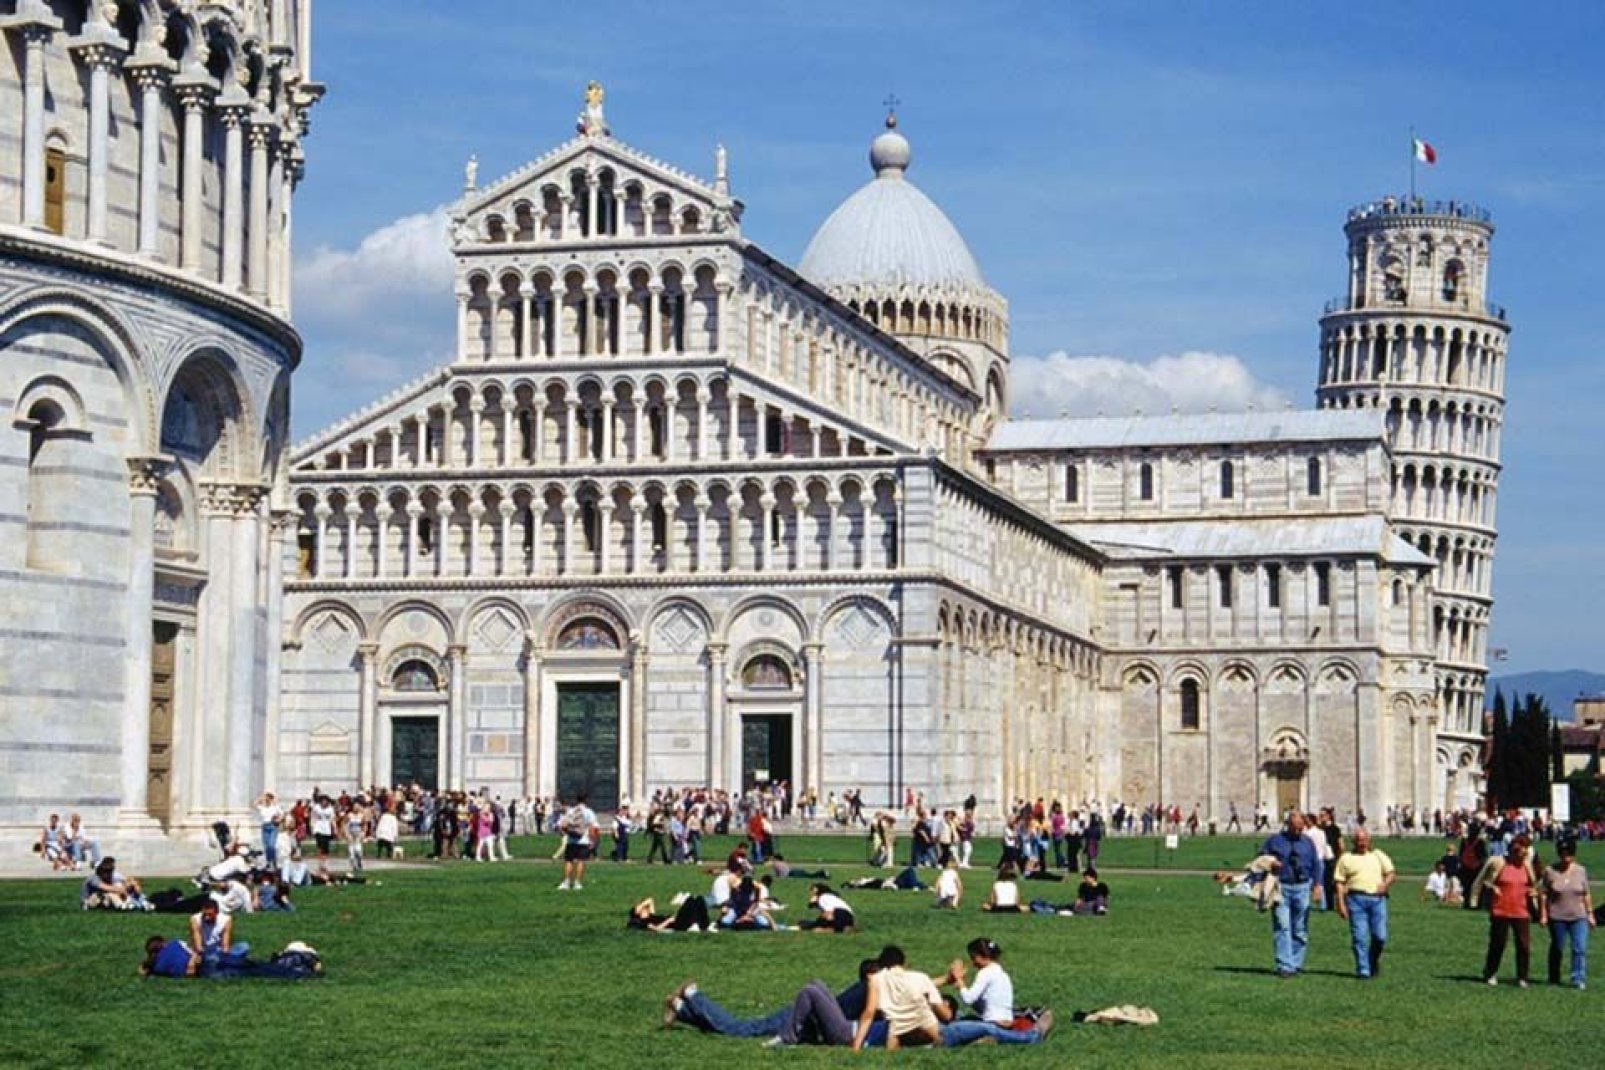 A beautiful view of the architectural complex including the Cathedral, the Baptistry, the Campo Santo and, of course, the Leaning Tower